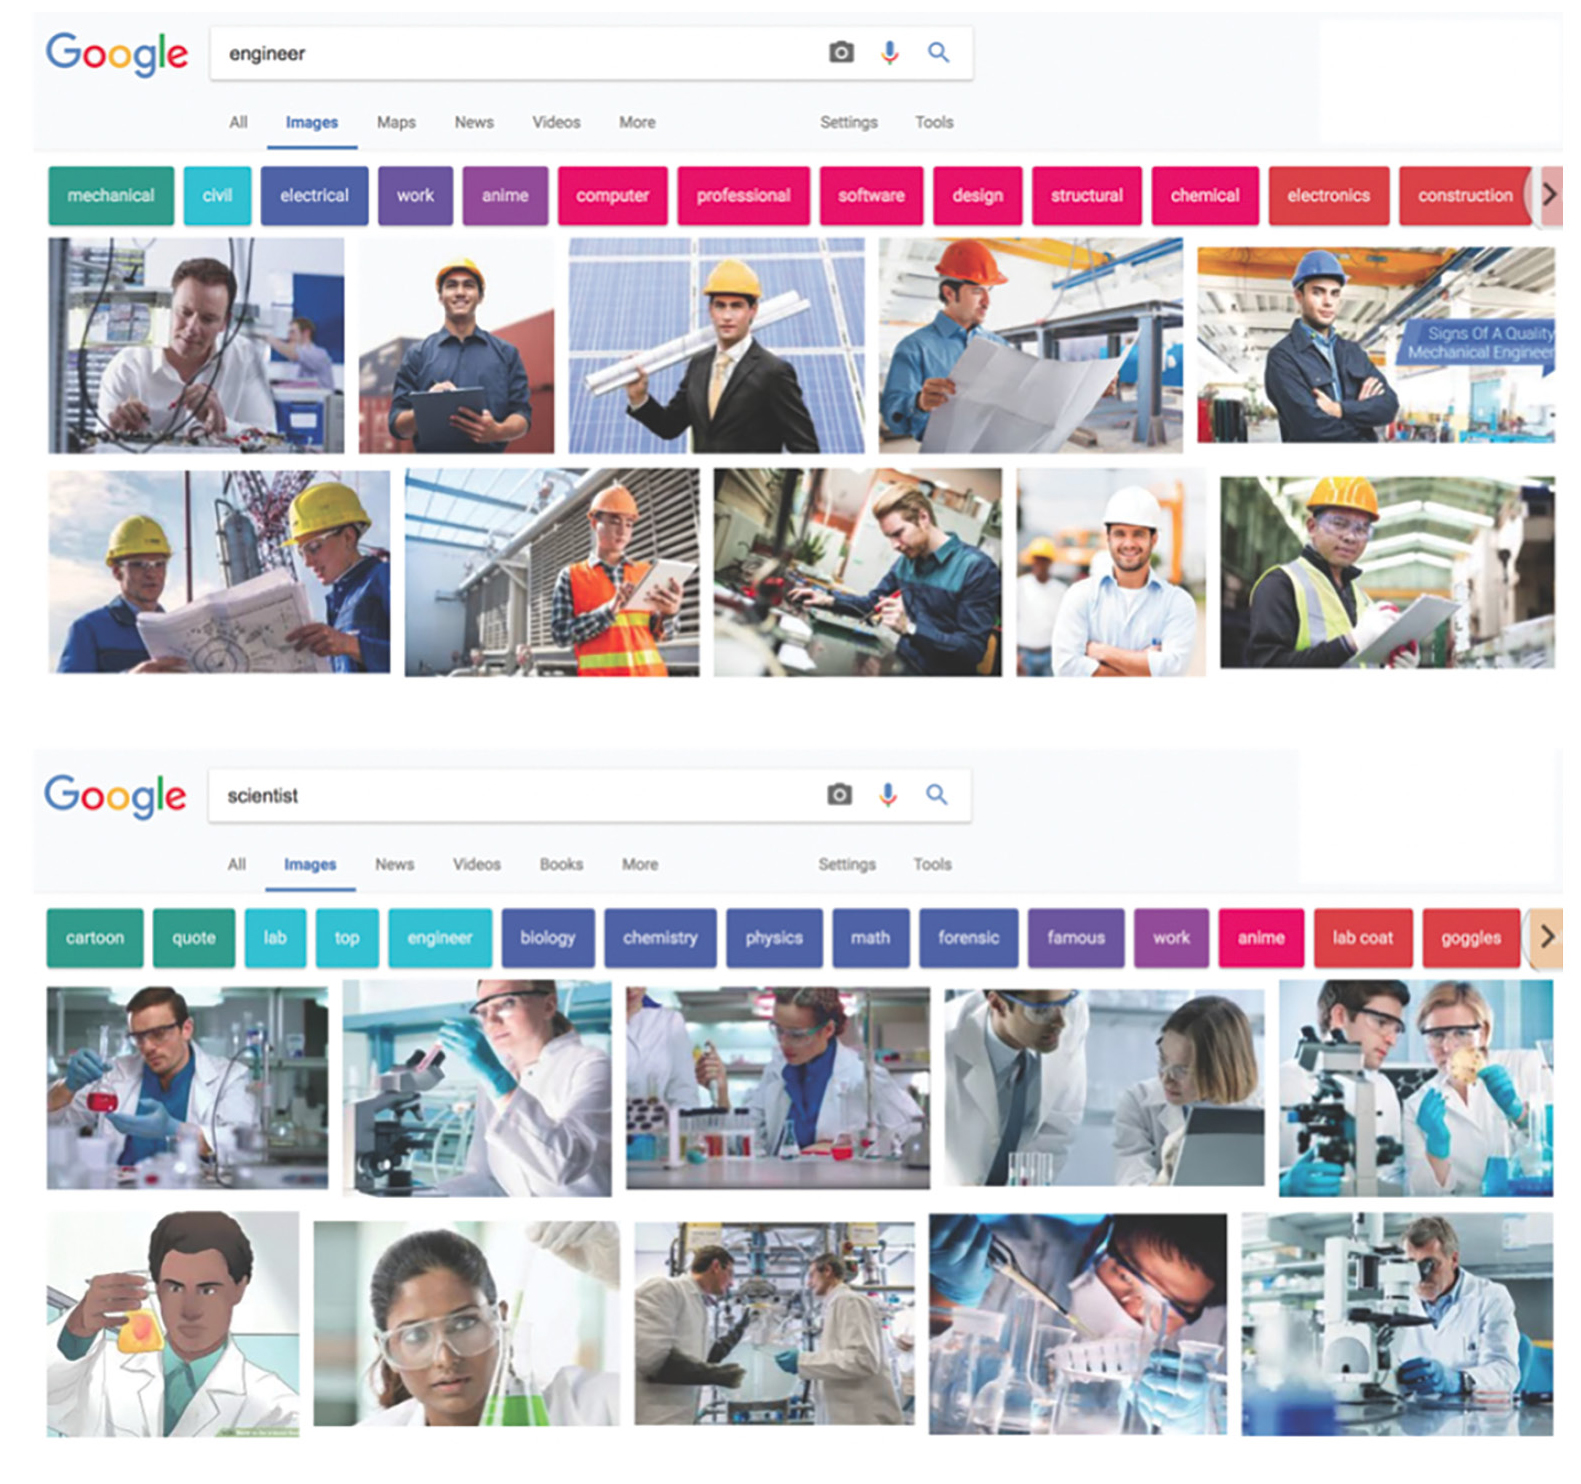 Image search results for “engineer” and “scientist.”